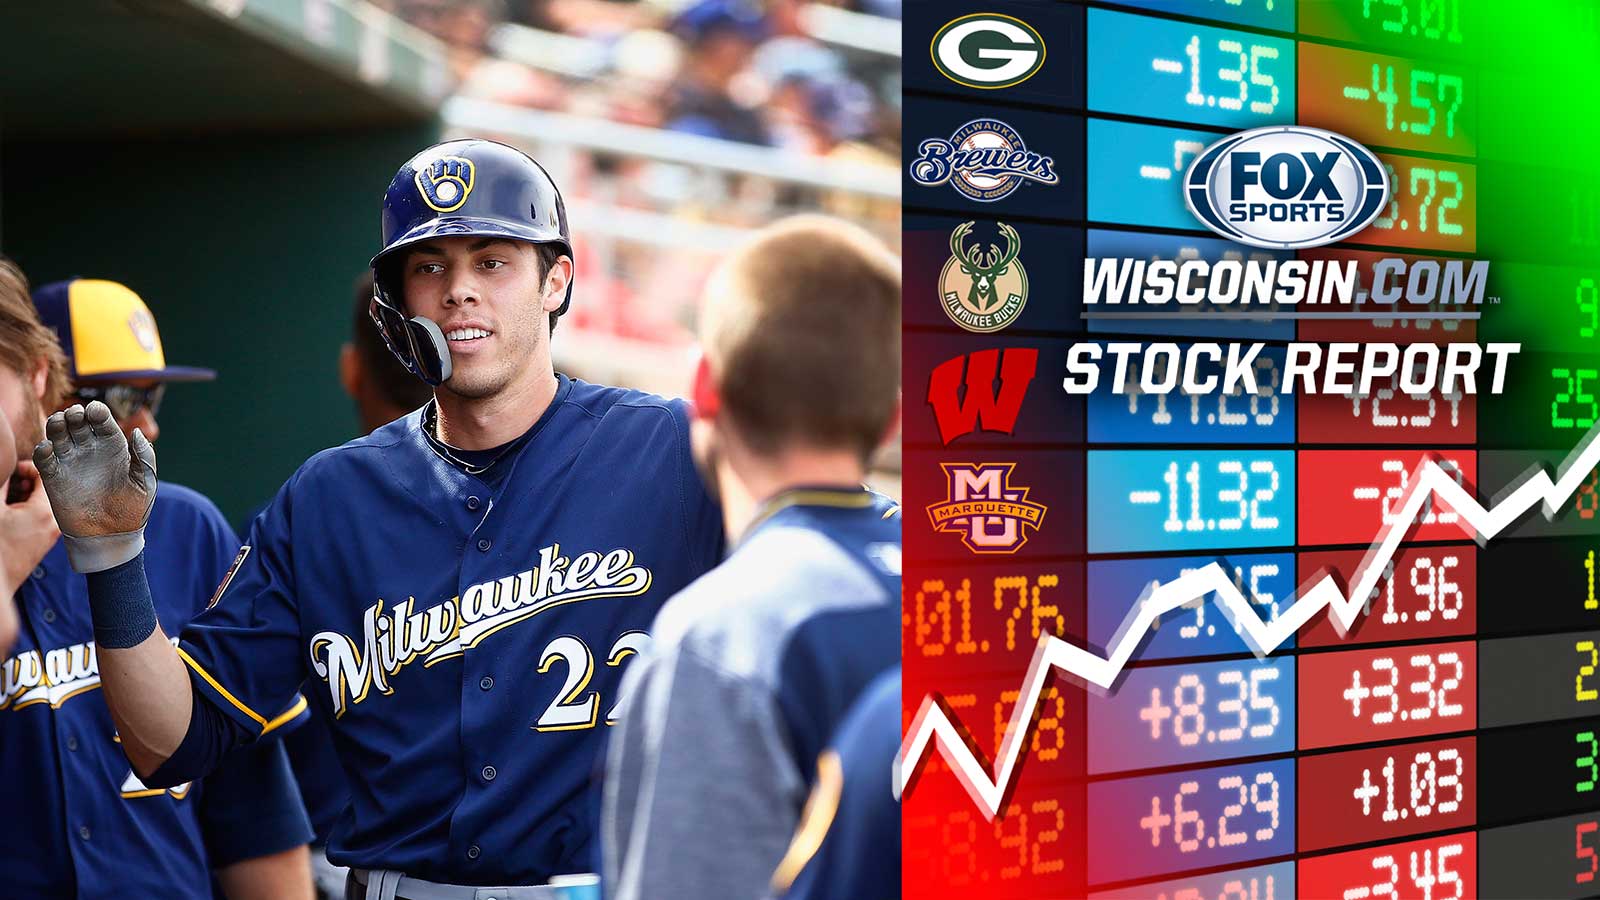 As Yelich goes, so go the Brewers